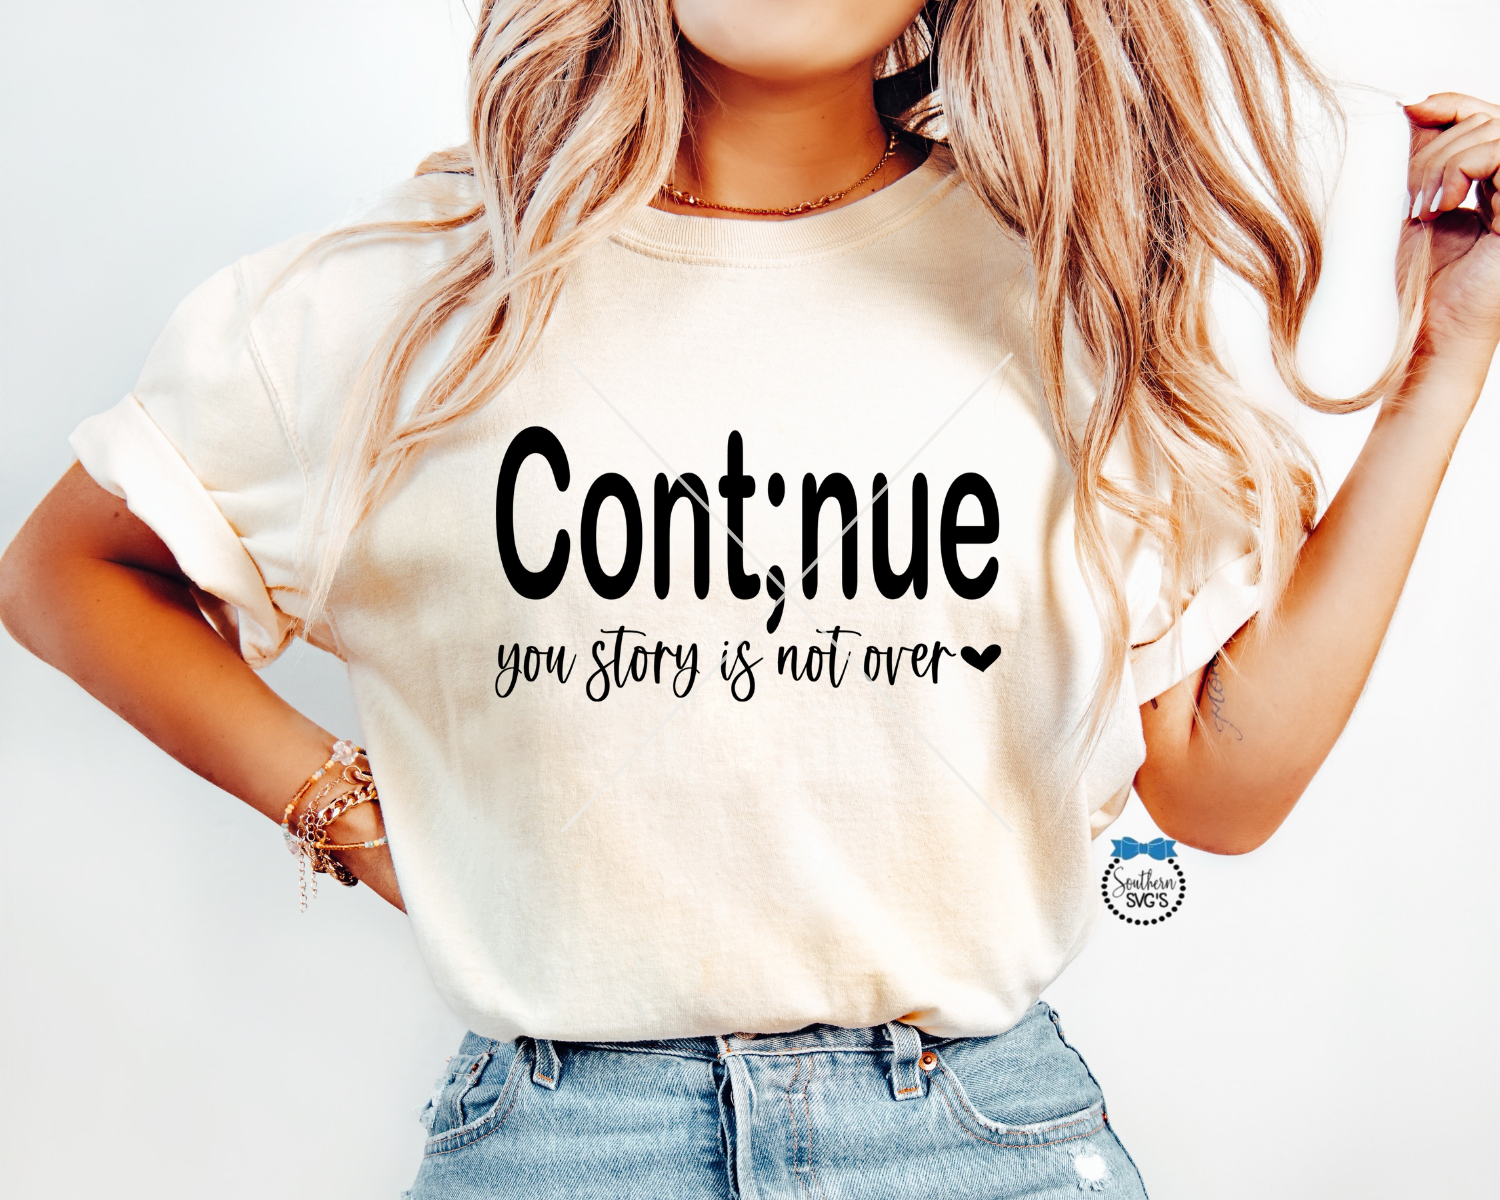 Continue Your Story Is Not Over Semi Colon SVG, Suicide Awareness PnG, SVG, Instant Download, Cricut Cut Files, Silhouette Cut Files, UVdTF